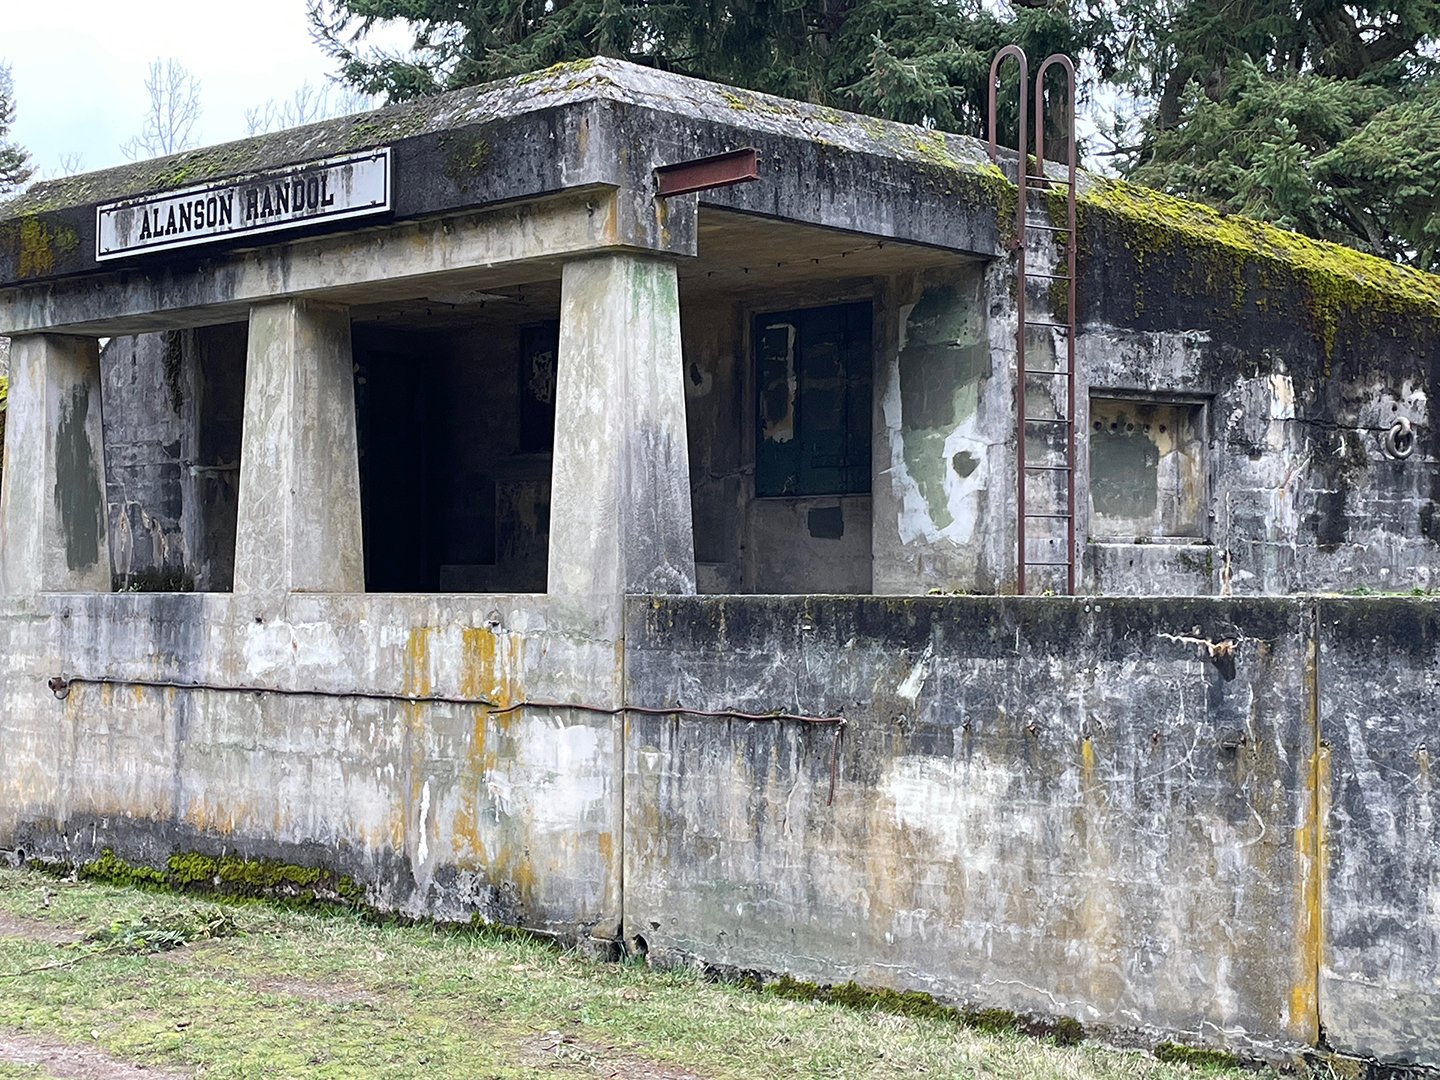    One of the abandoned batteries.   